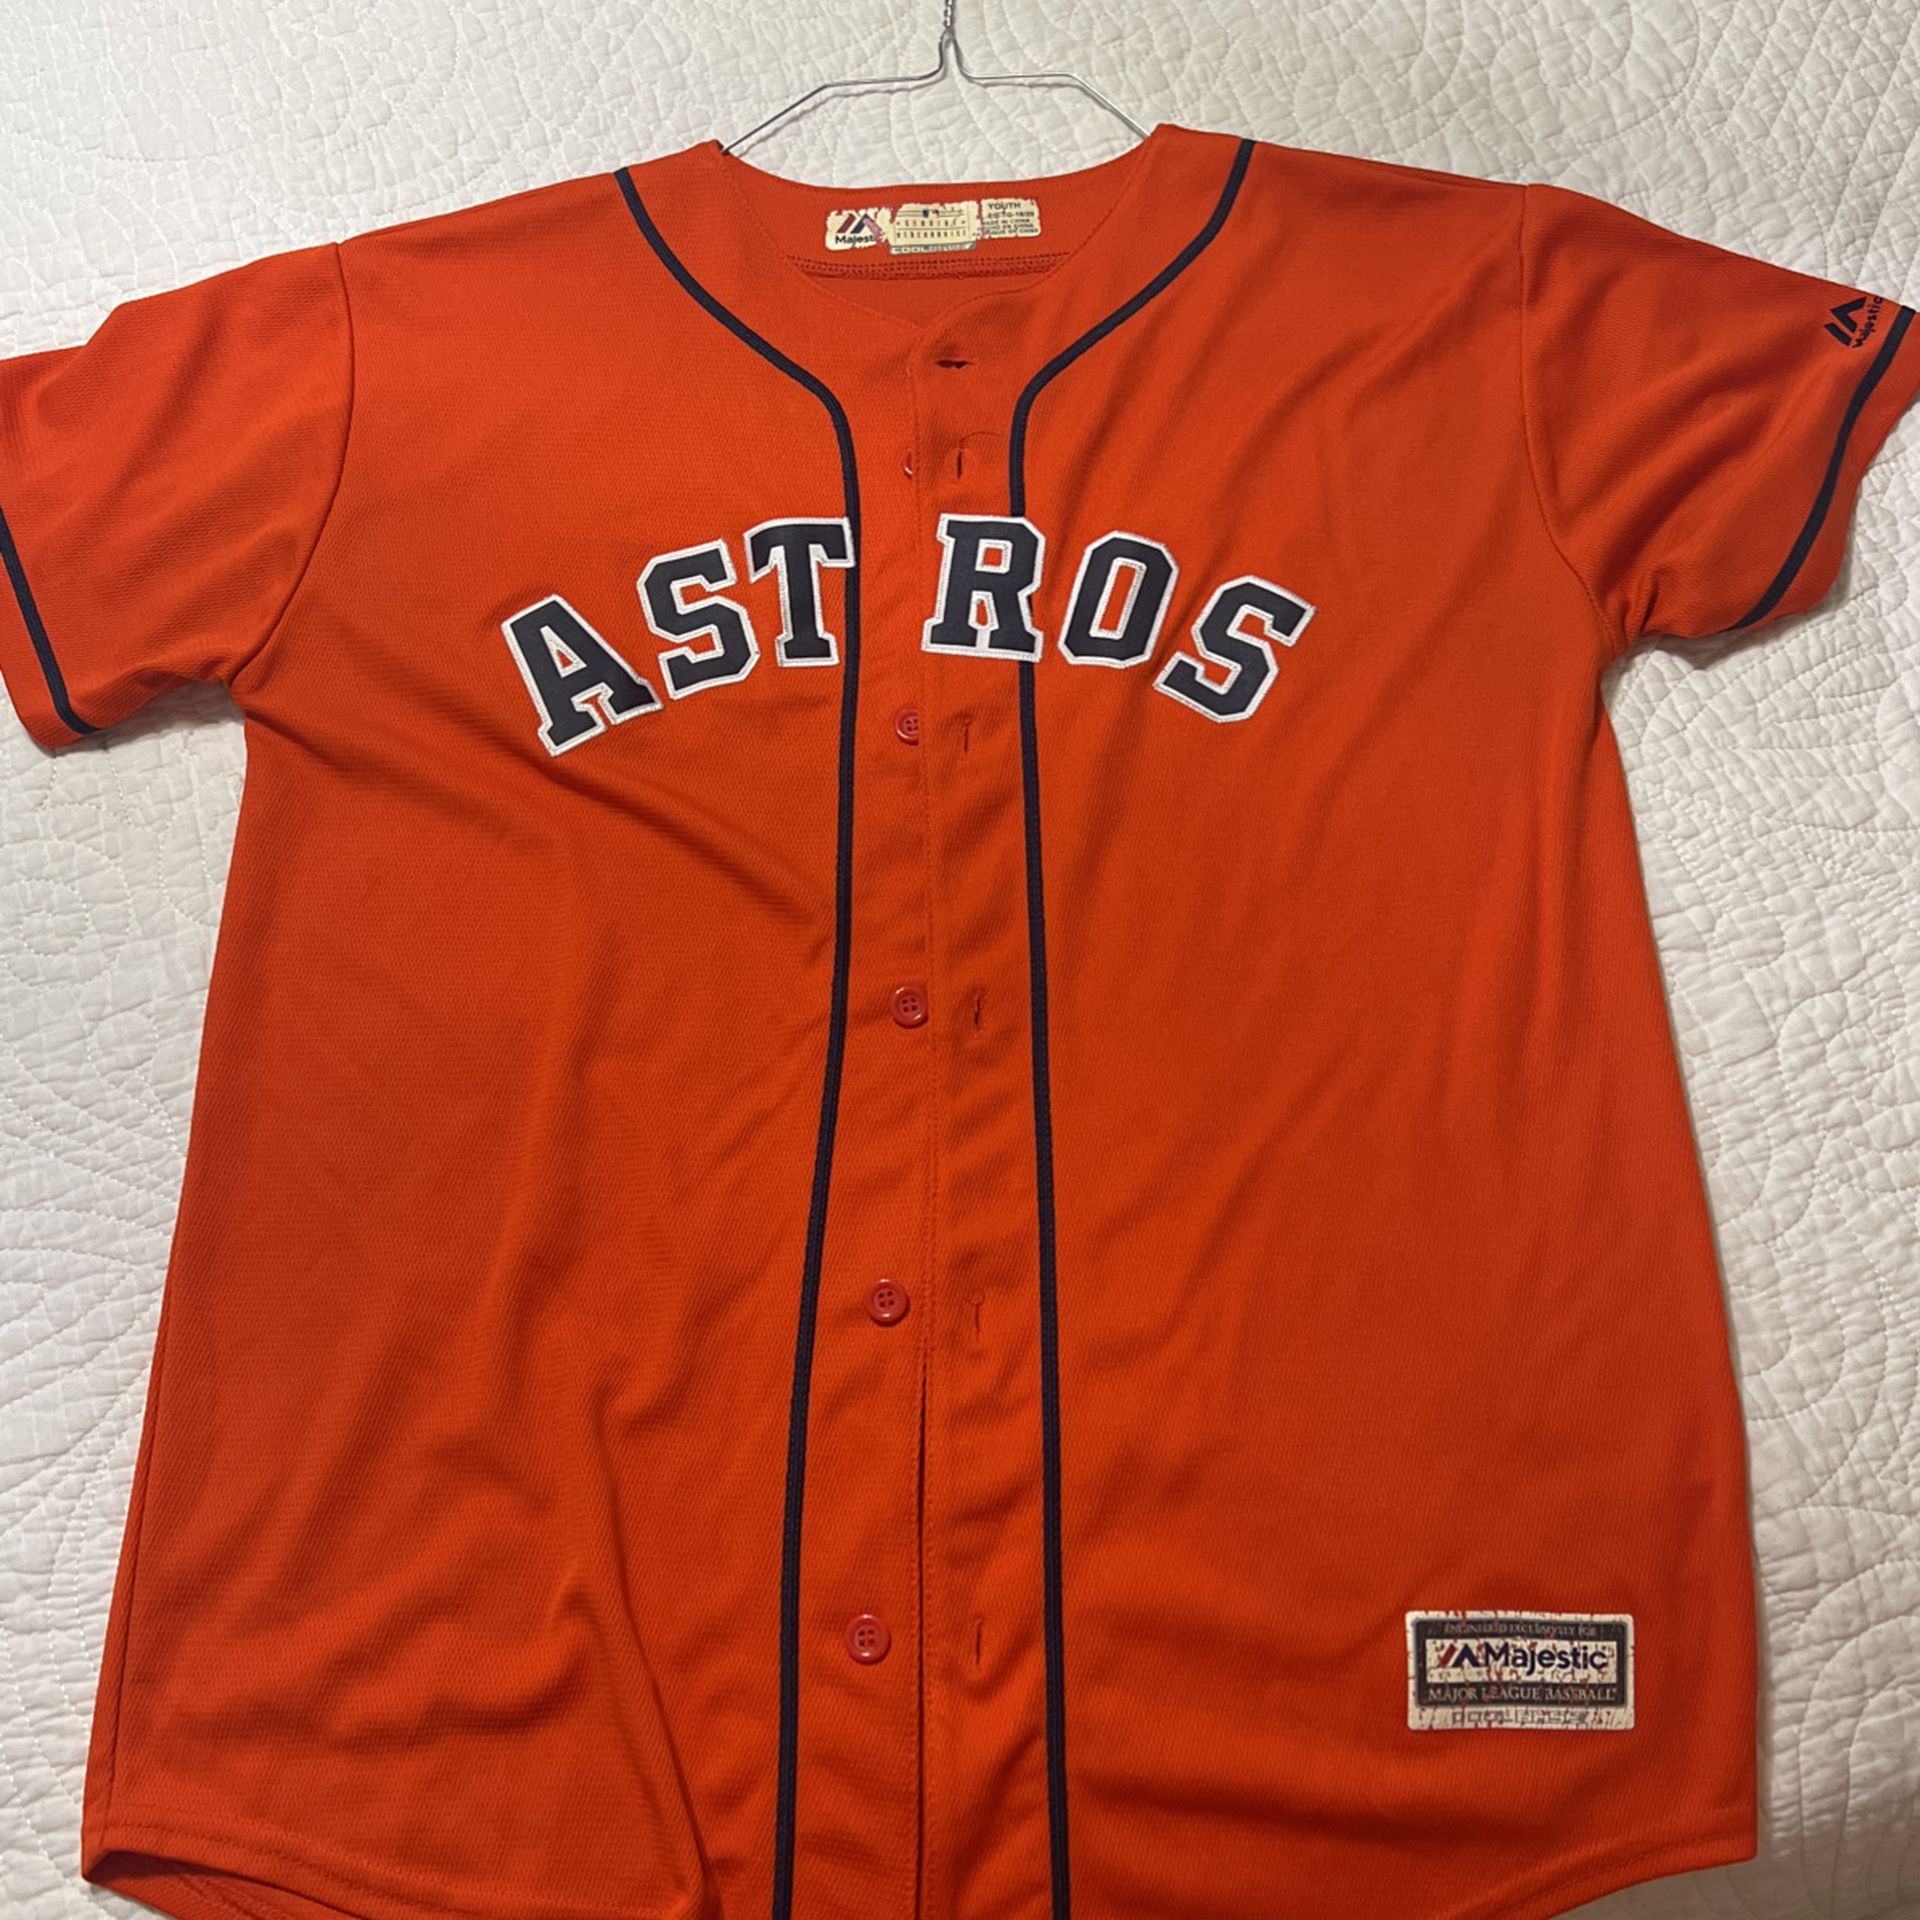 Astros Jersey for Sale in Pasadena, TX - OfferUp